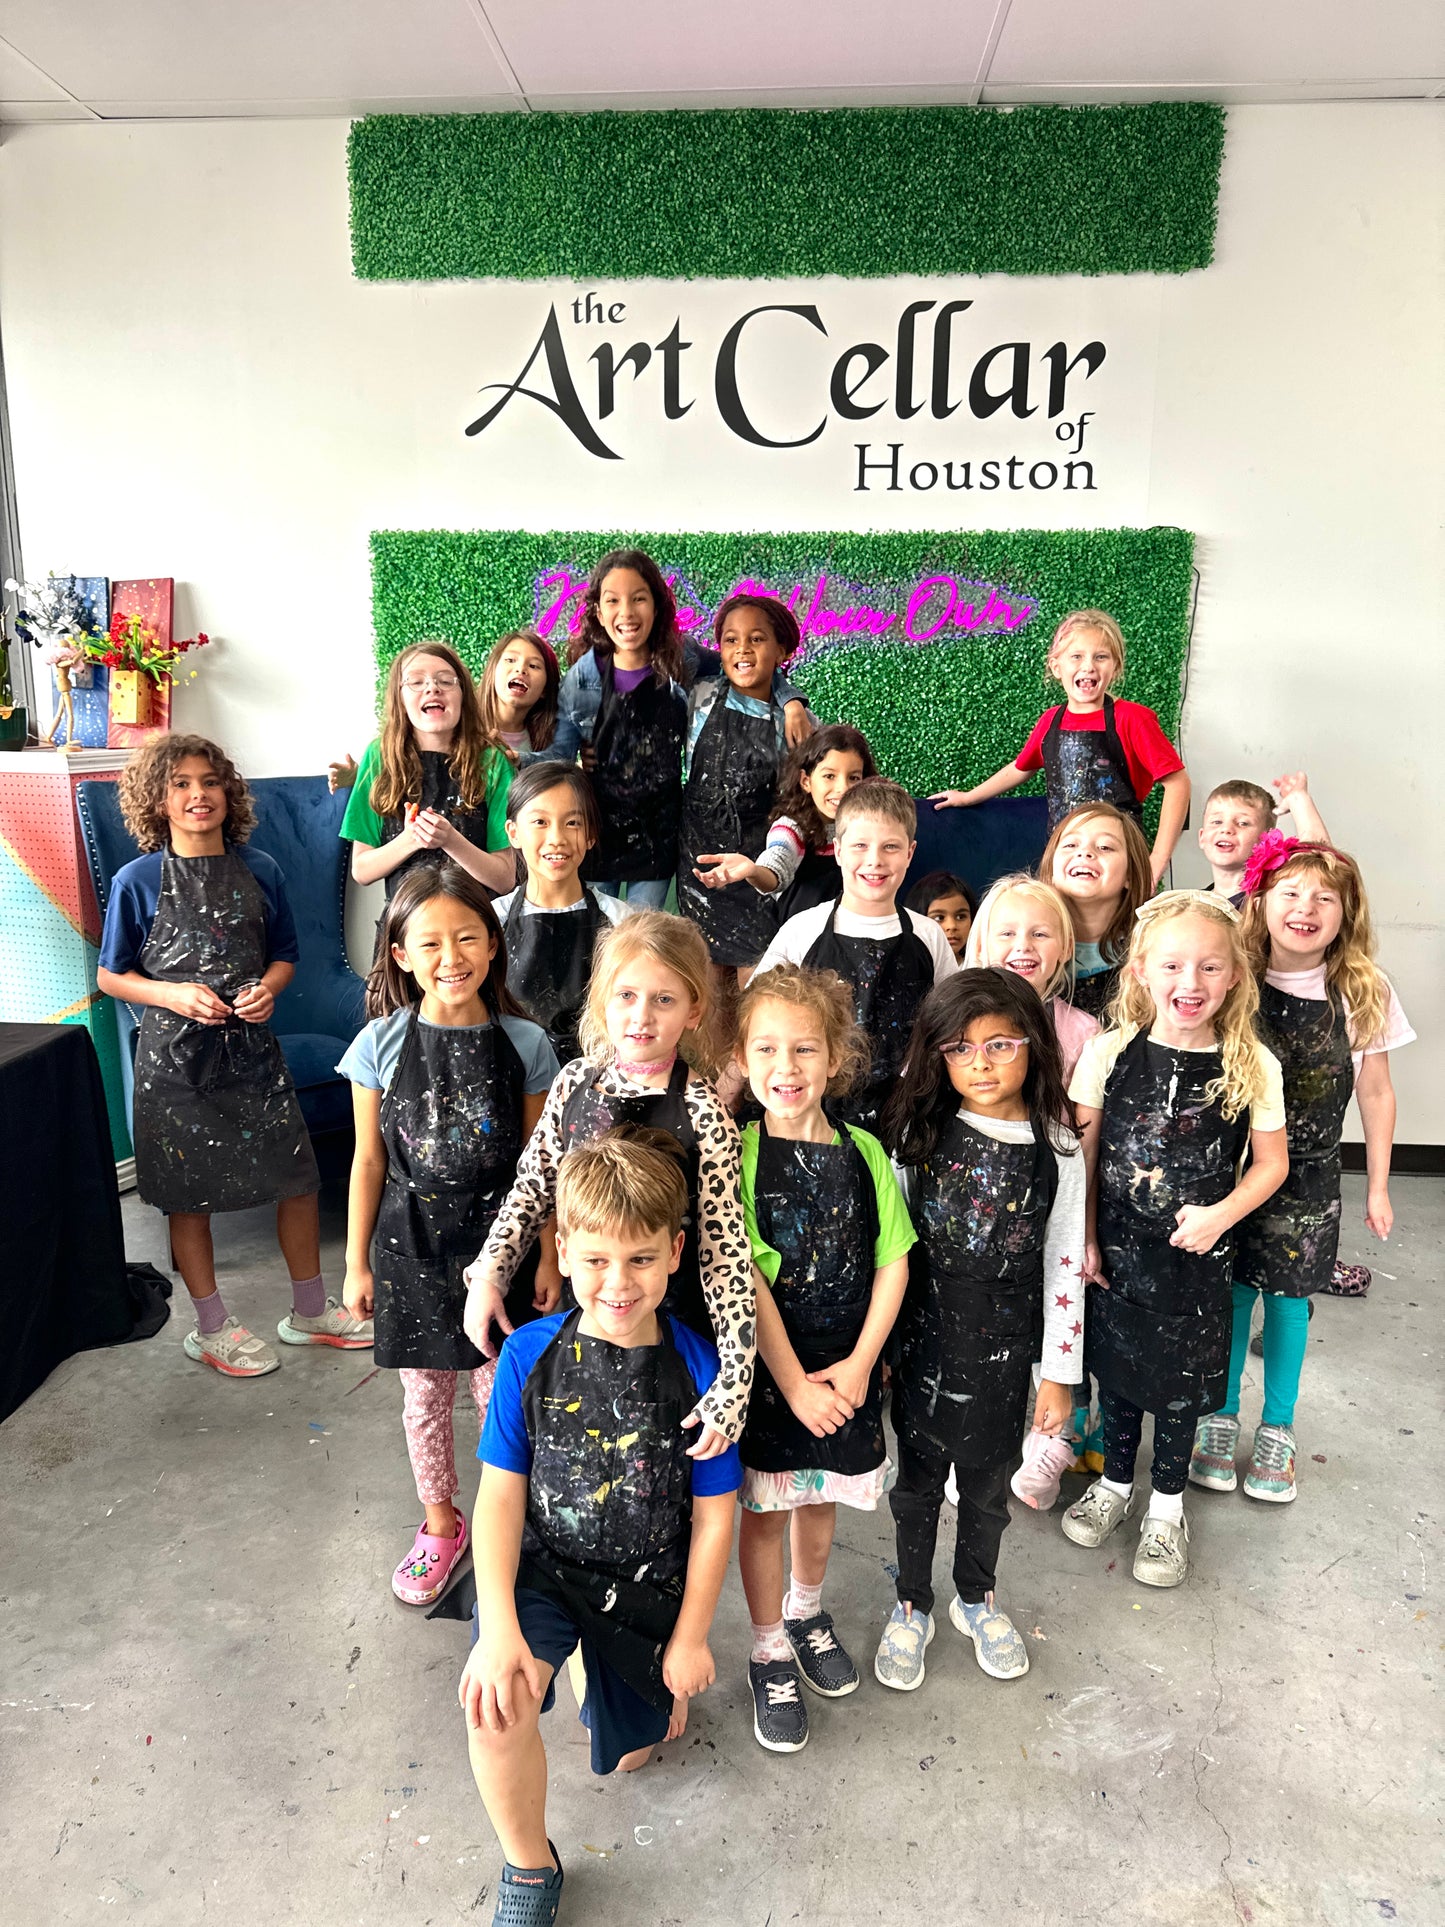 Sun, Mar 3rd, 2-4p "Emoji Day" Private Houston Kids Painting Party